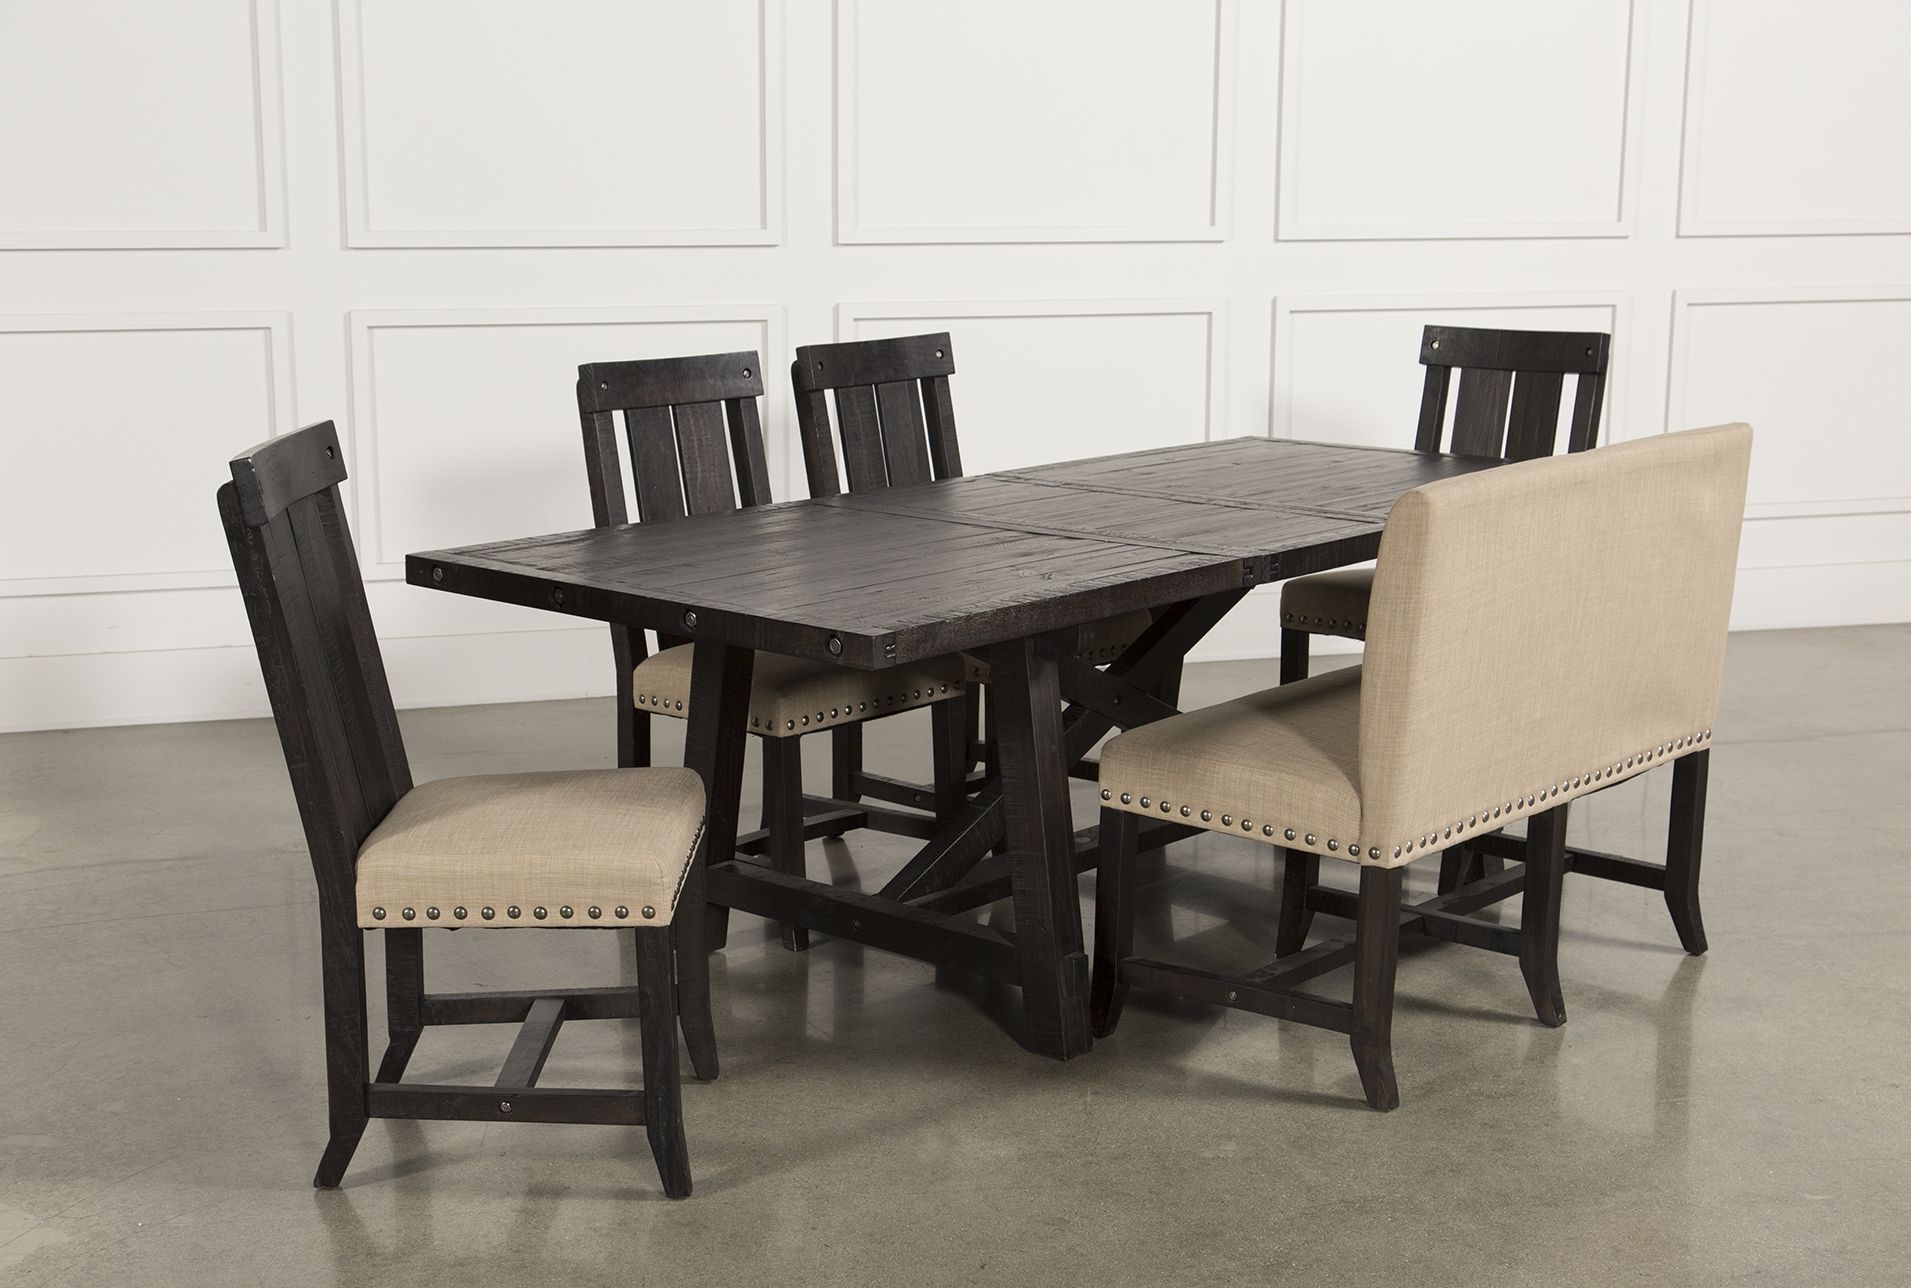 Jaxon 6 Piece Rectangle Dining Set W/bench & Wood Chairs | Products Intended For Recent Jaxon 6 Piece Rectangle Dining Sets With Bench &amp; Uph Chairs (View 6 of 20)